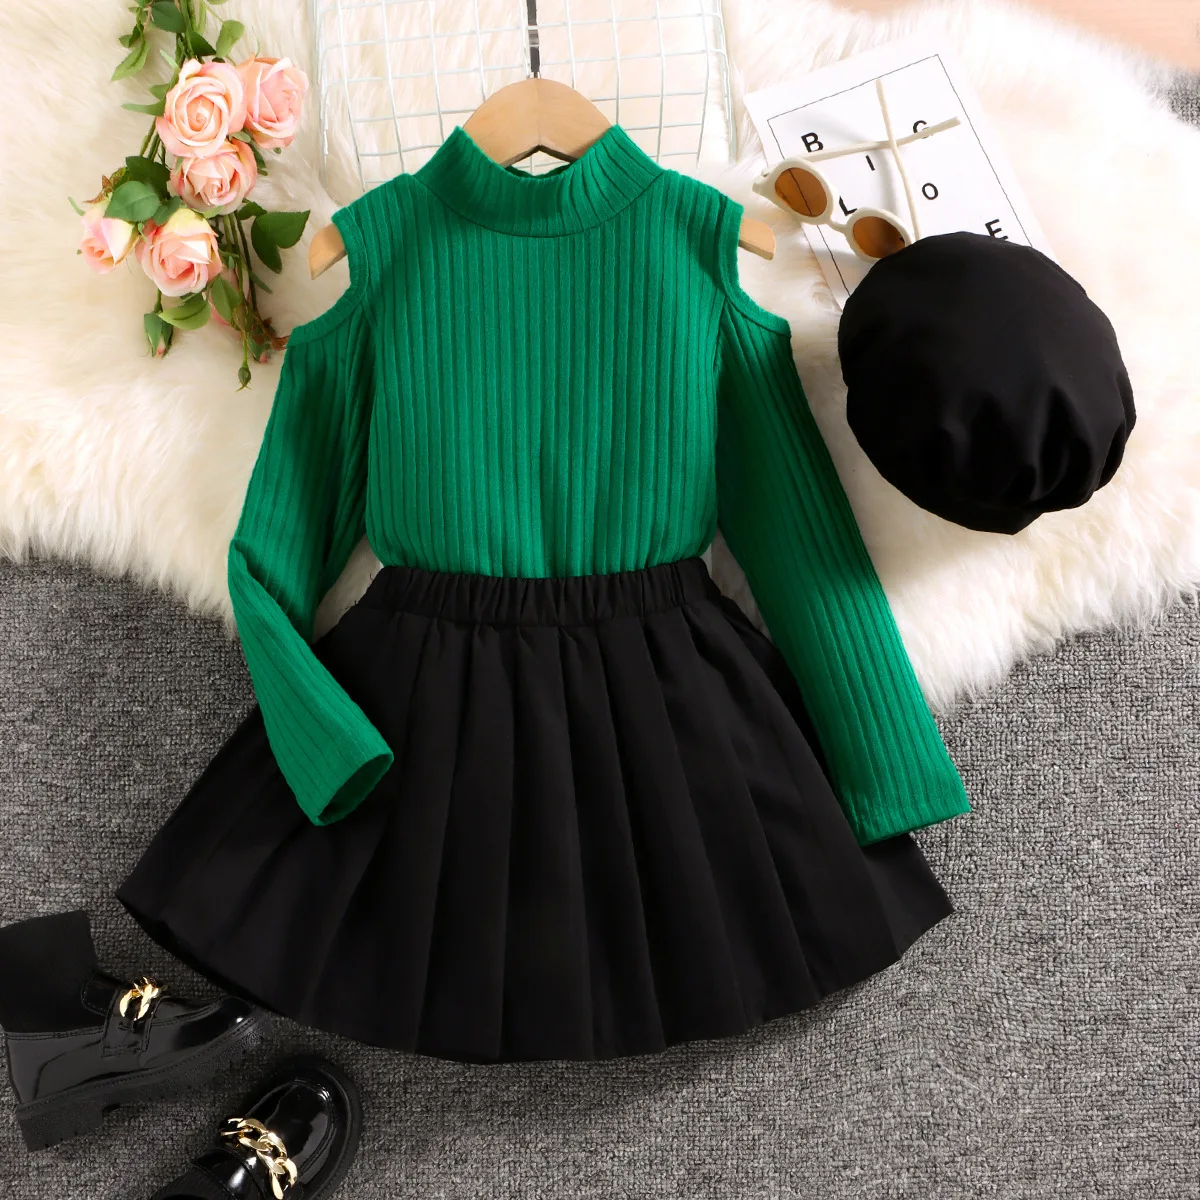 Korean style toddler girls clothing sets fashion off the shoulder long-sleeve shirts+skirt+hat 3pcs kids clothes fall outfits